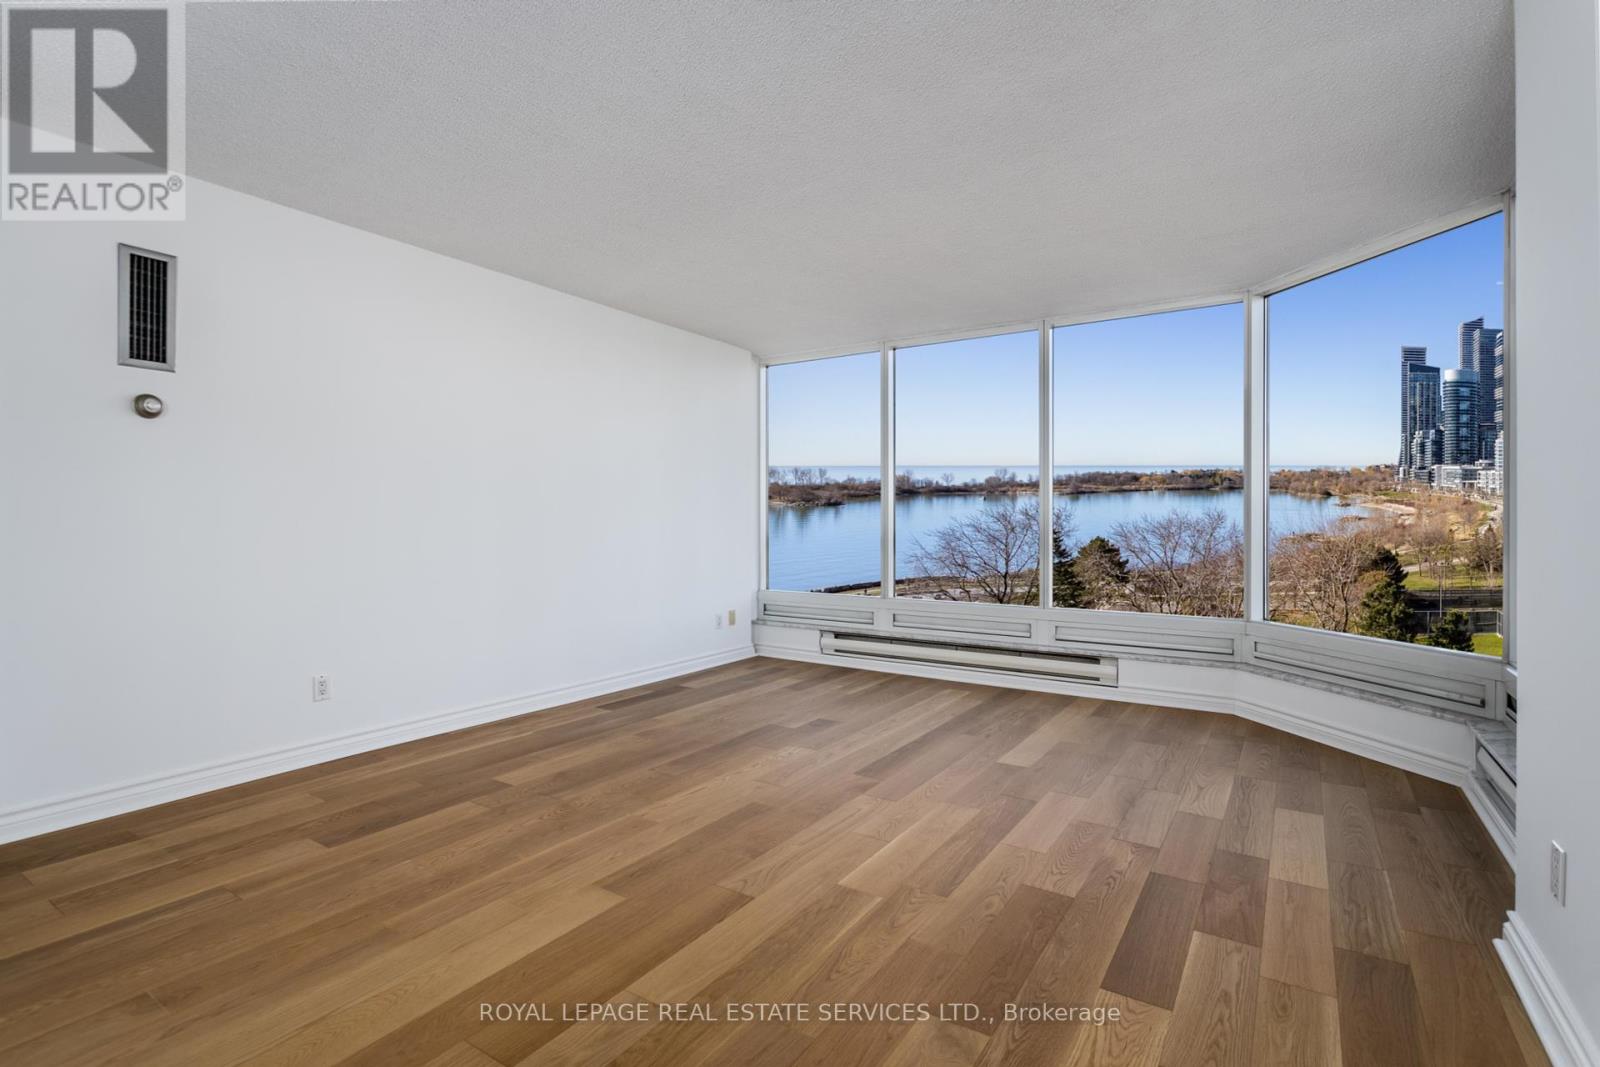 1 Palace Pier Court, Toronto, 2 Bedrooms Bedrooms, ,2 BathroomsBathrooms,Single Family,For Sale,Palace Pier,W8221710